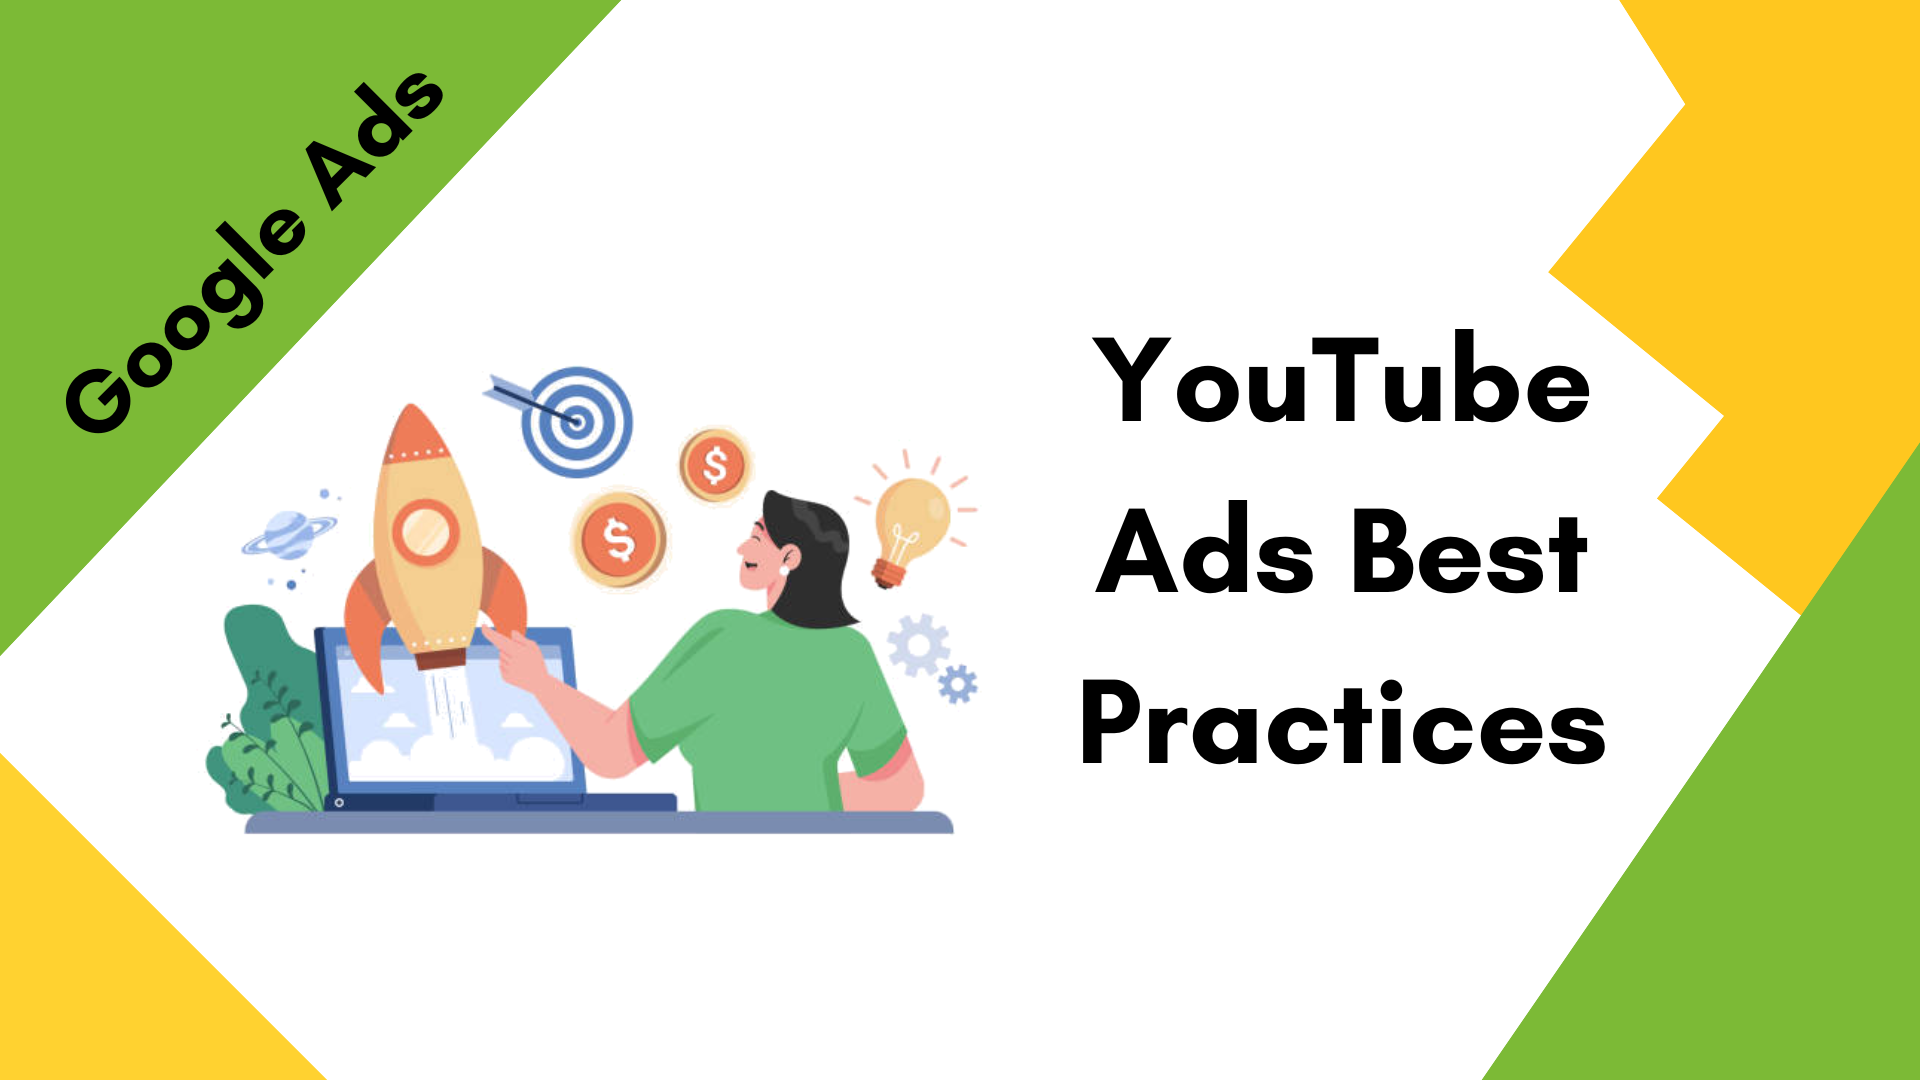 Youtube Ads Best Practices: 11 Tips For Creating Ads That Win